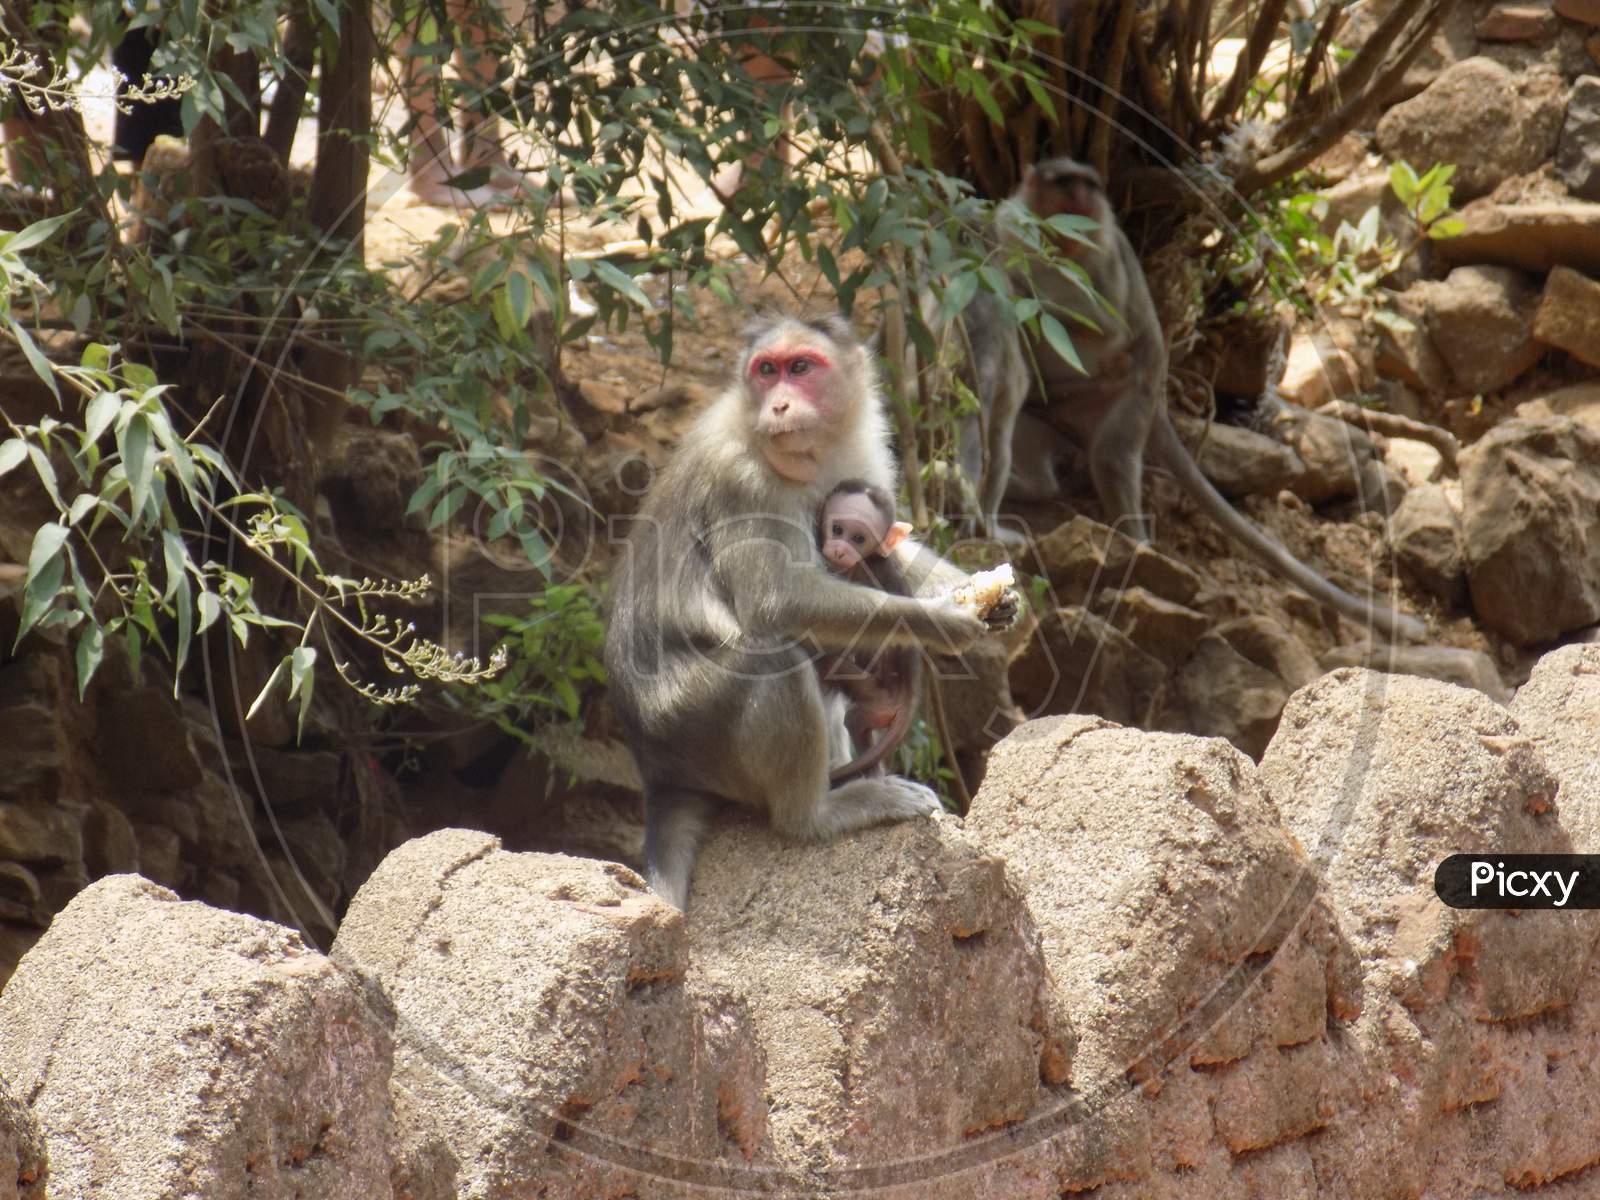 Monkey having food with it's baby